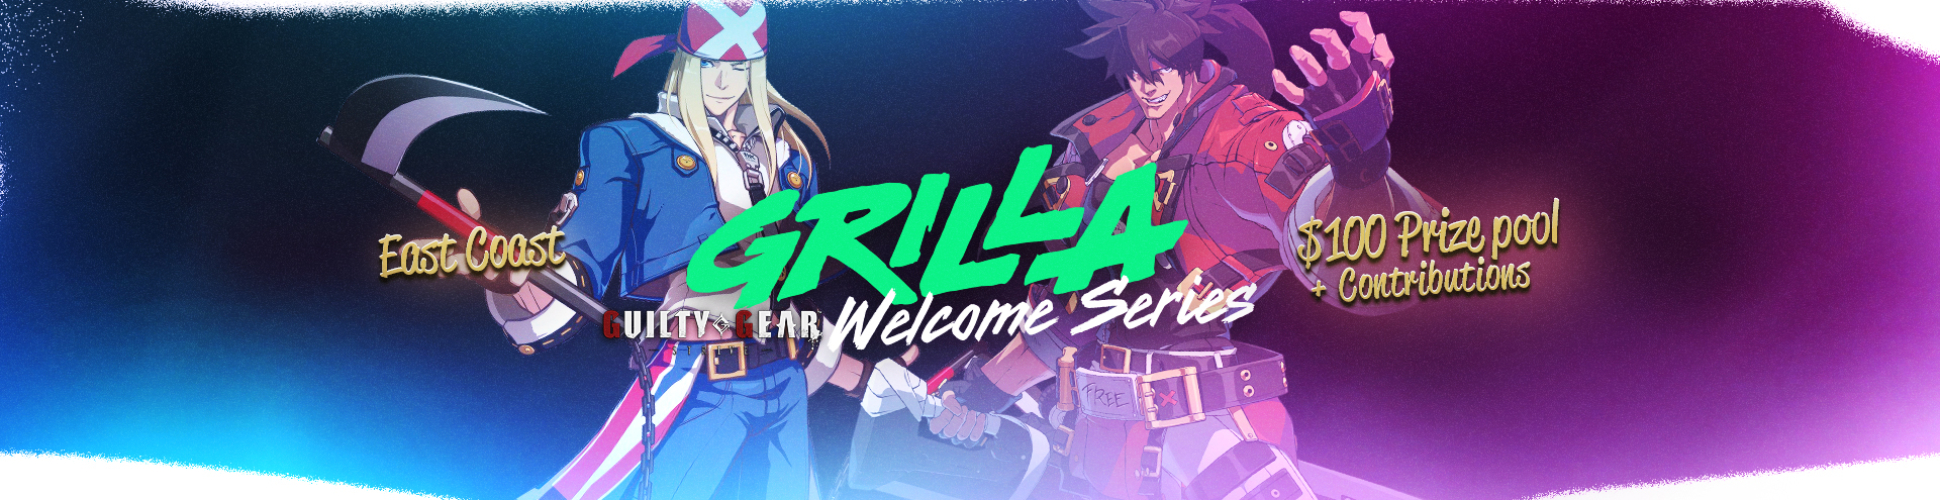 Grilla's Welcome Series, Part I (East Coast) PC